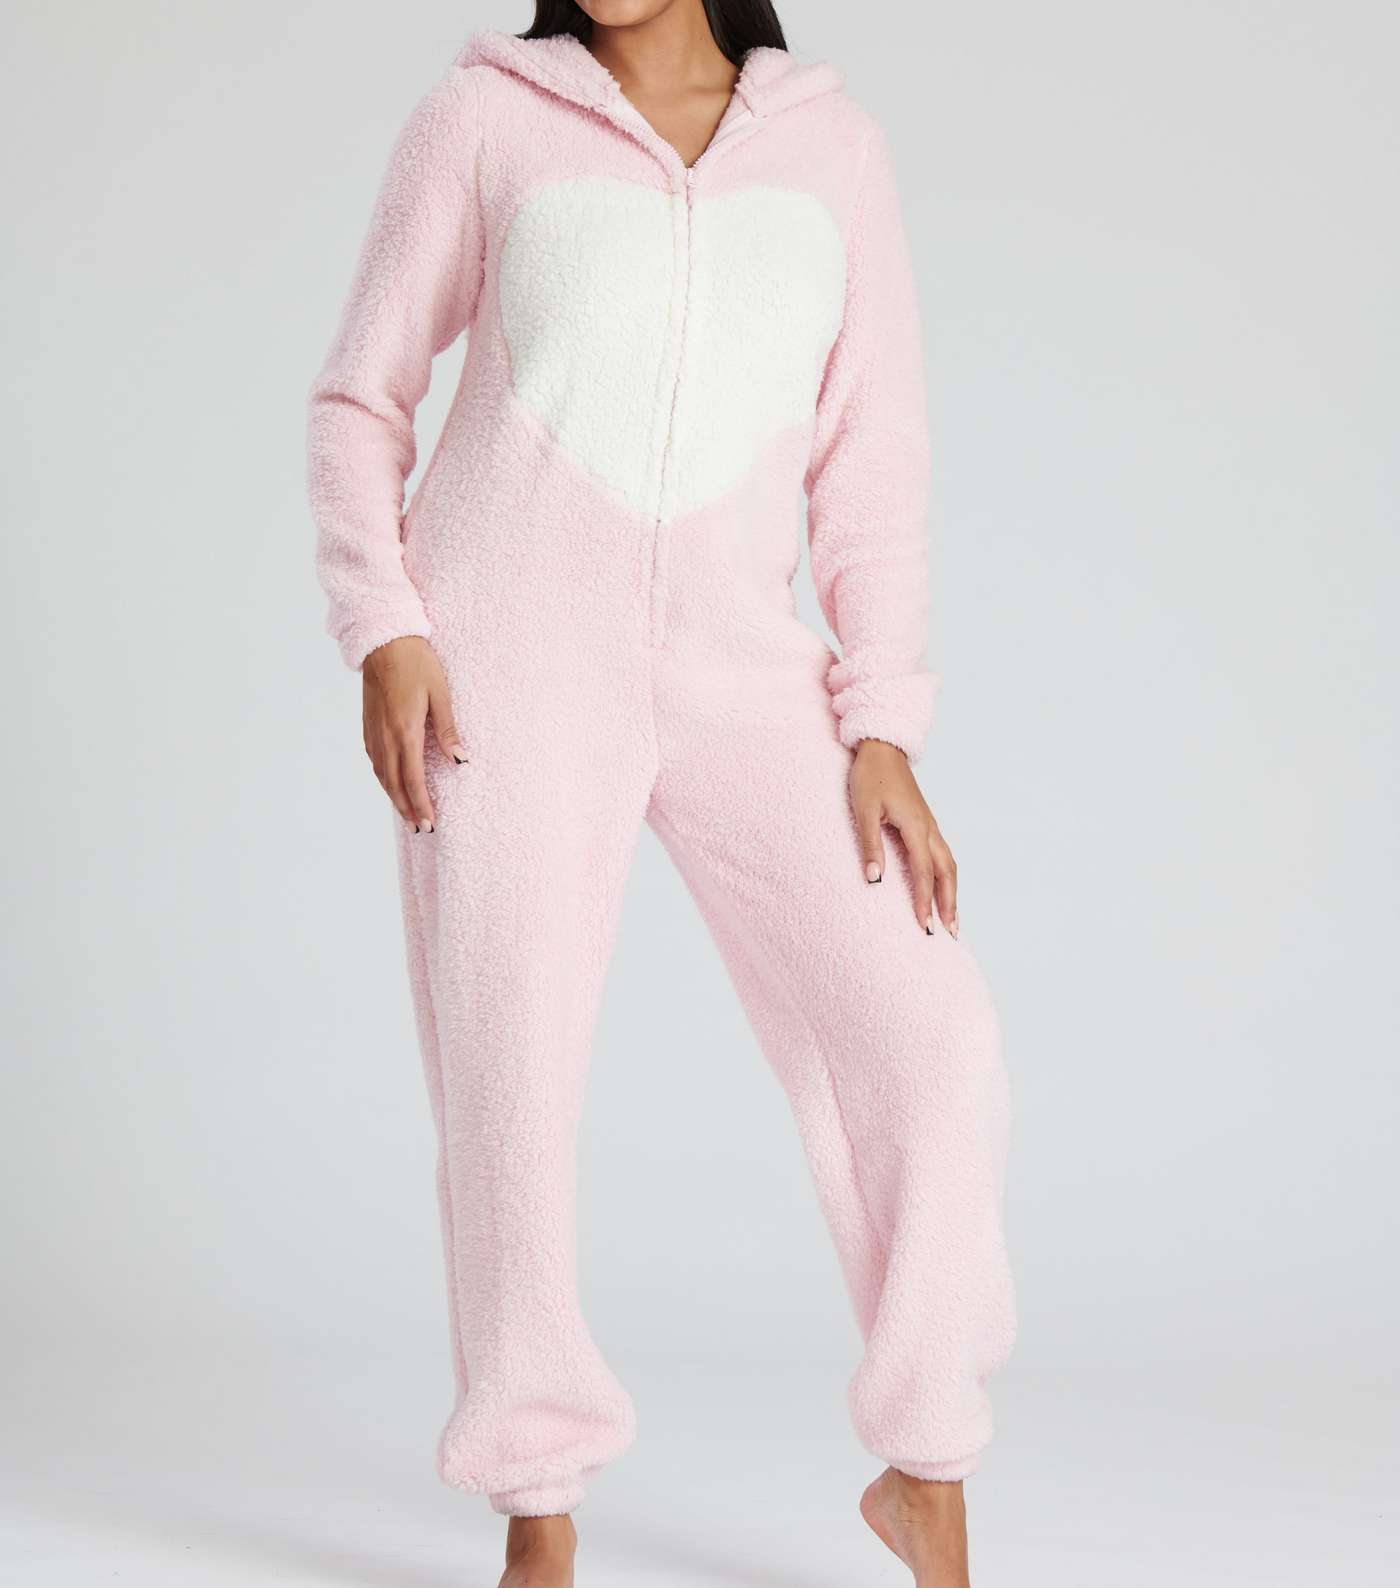 Loungeable Pink Teddy Pig Onesie Image 5